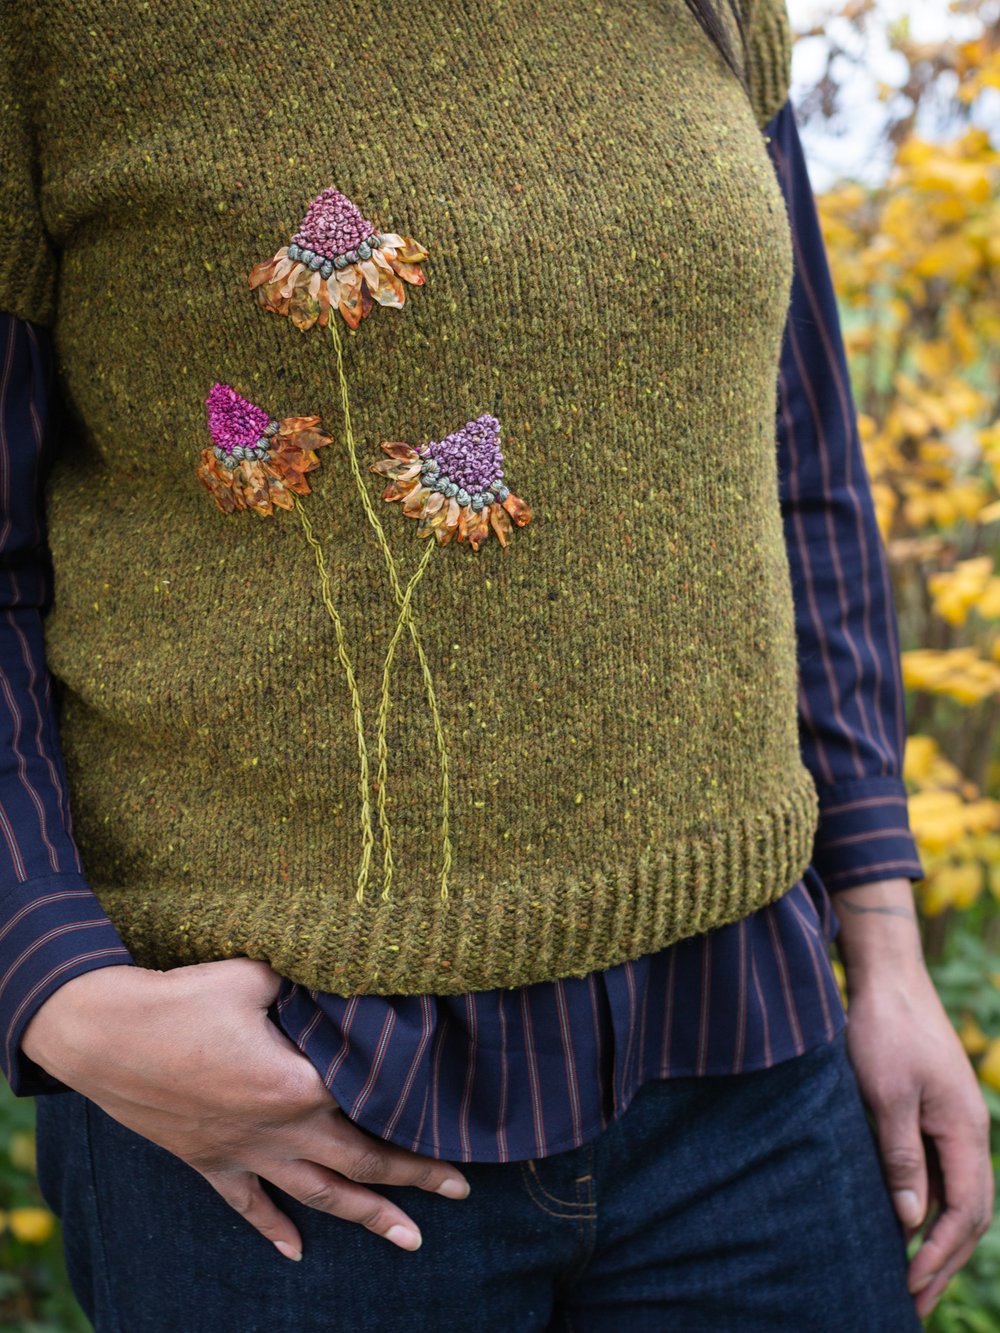 Embroidery on Knits by Judit Gummlich | Laine Publishing — flock |  Sustainable Yarn and Knitting Store